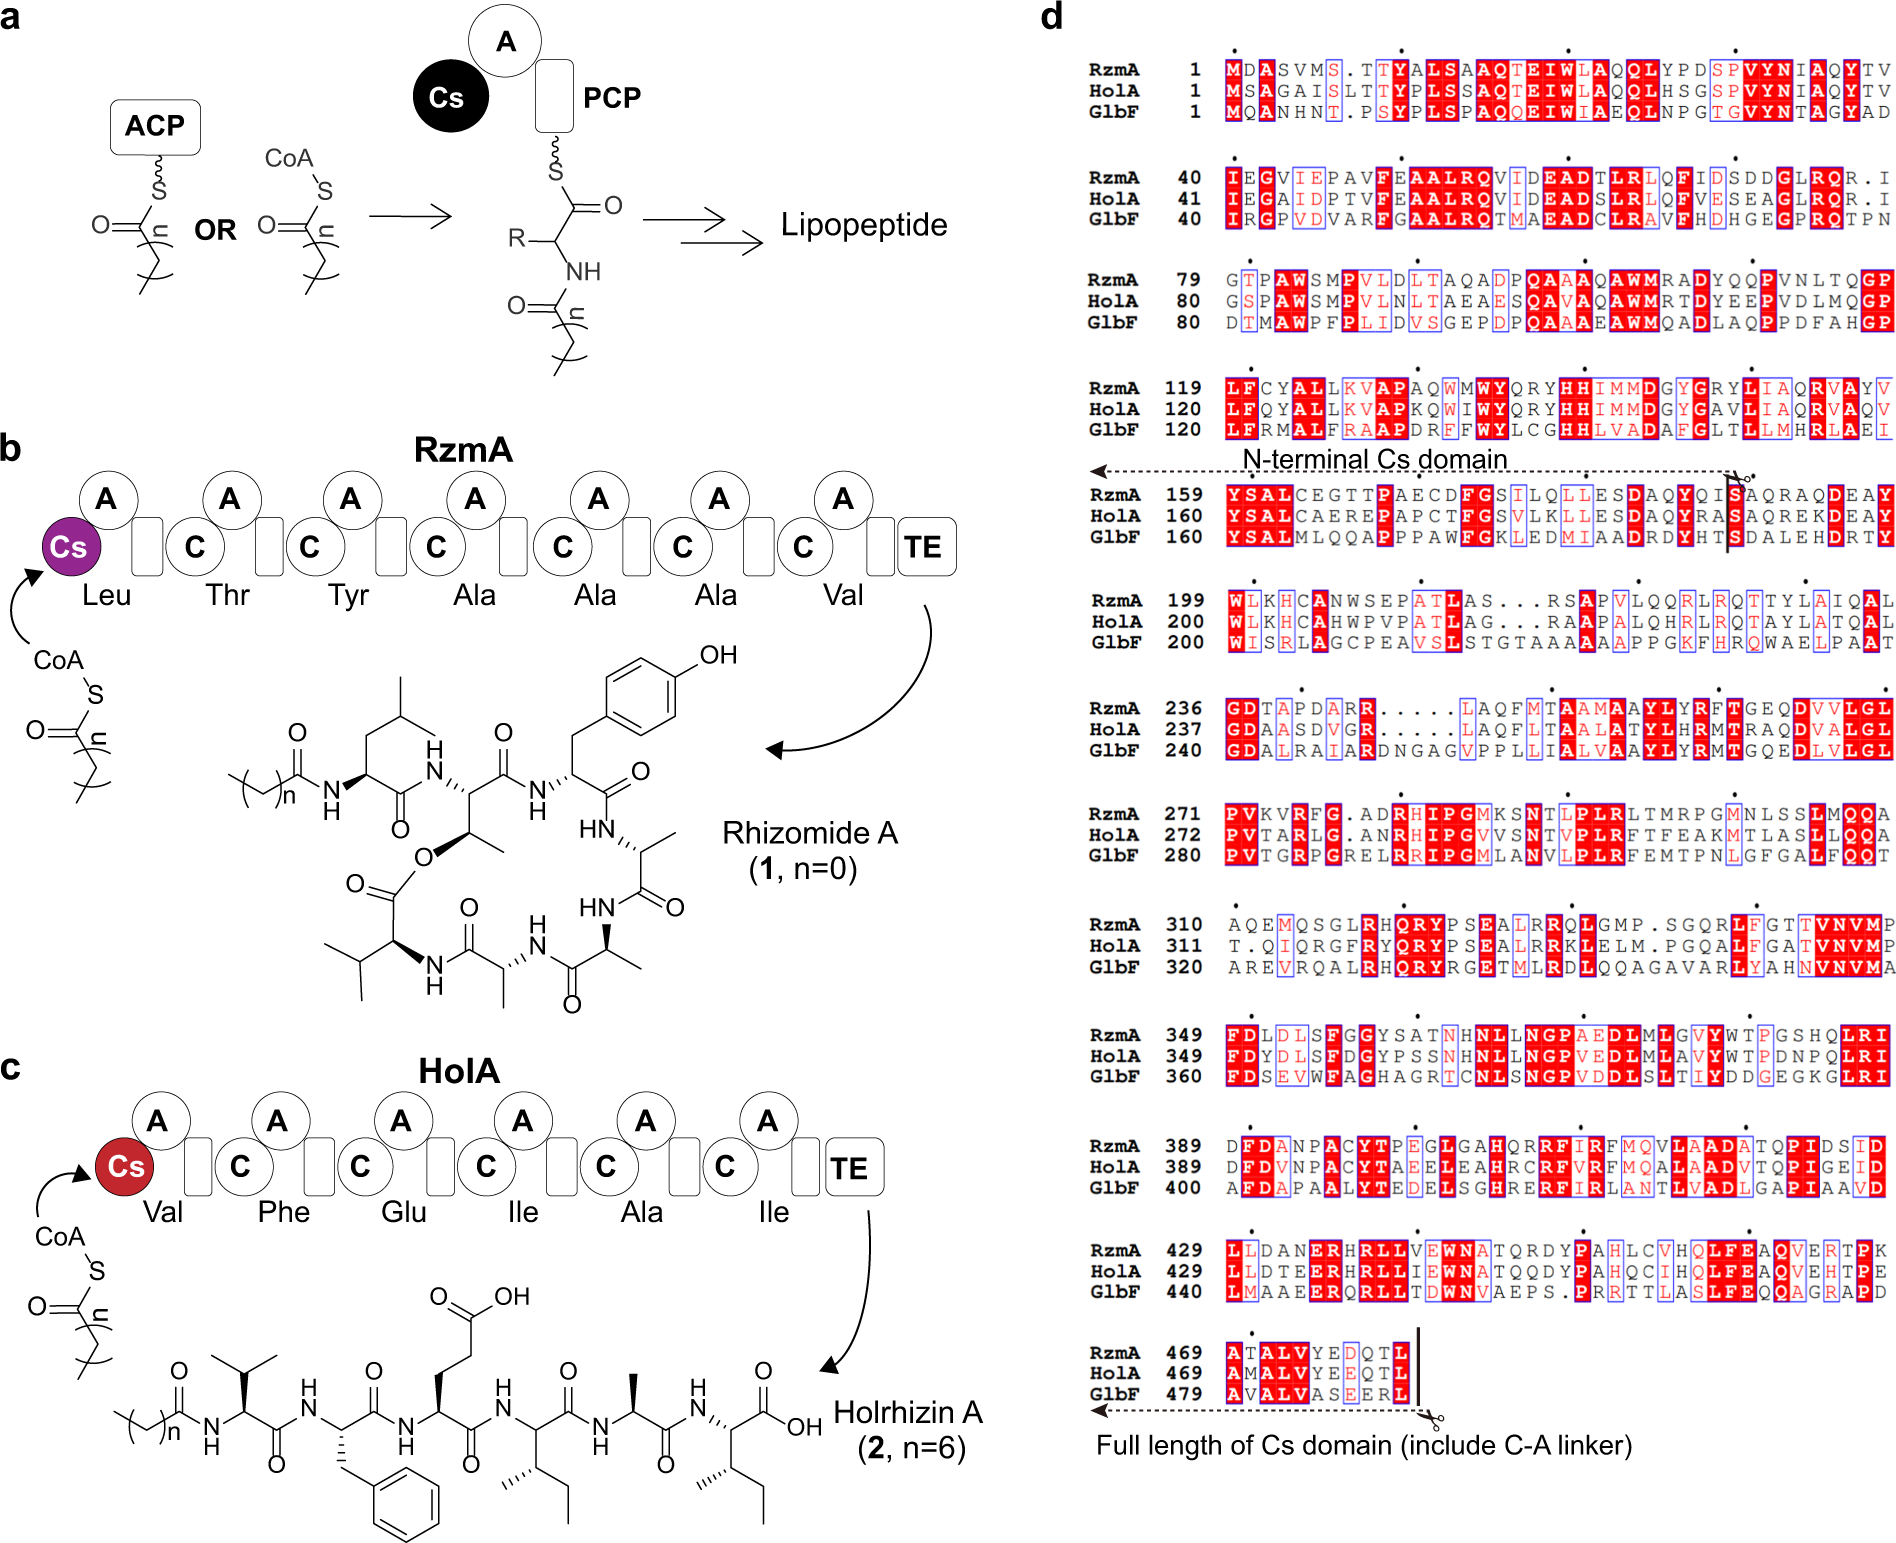 Subdomain dynamics enable chemical chain reactions in non-ribosomal peptide  synthetases